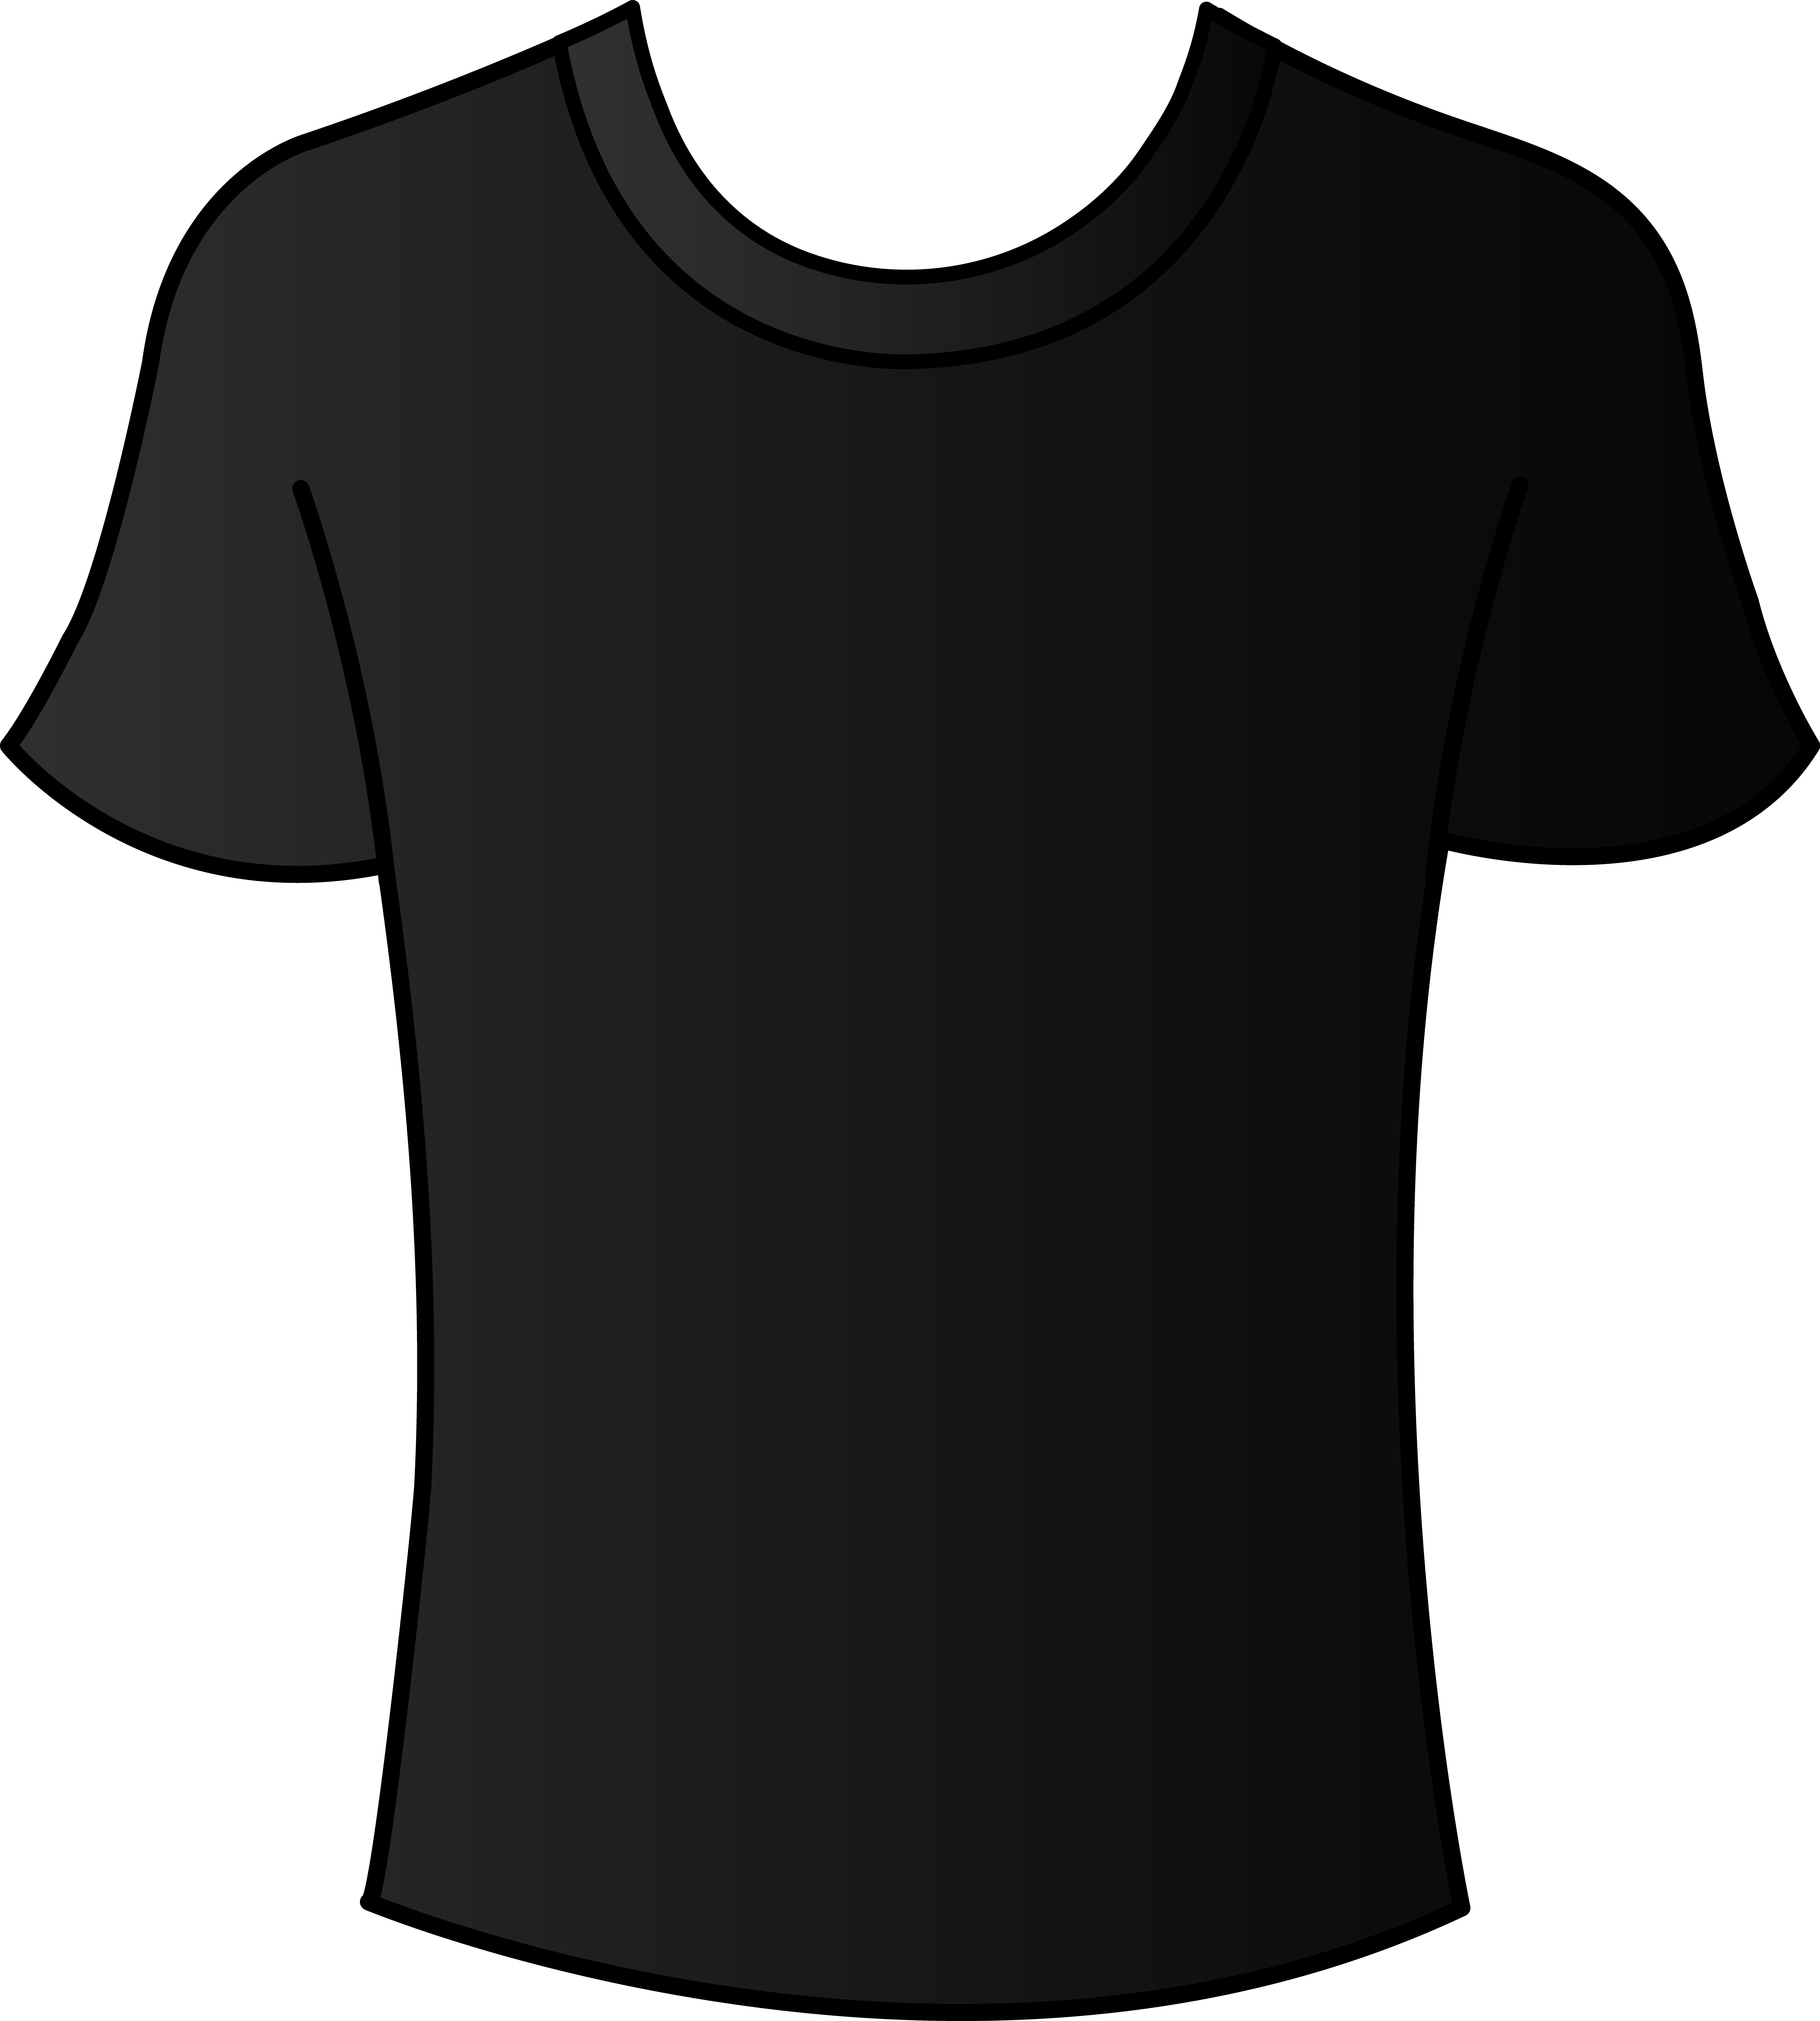 Tee Shirt Outline Cliparts co